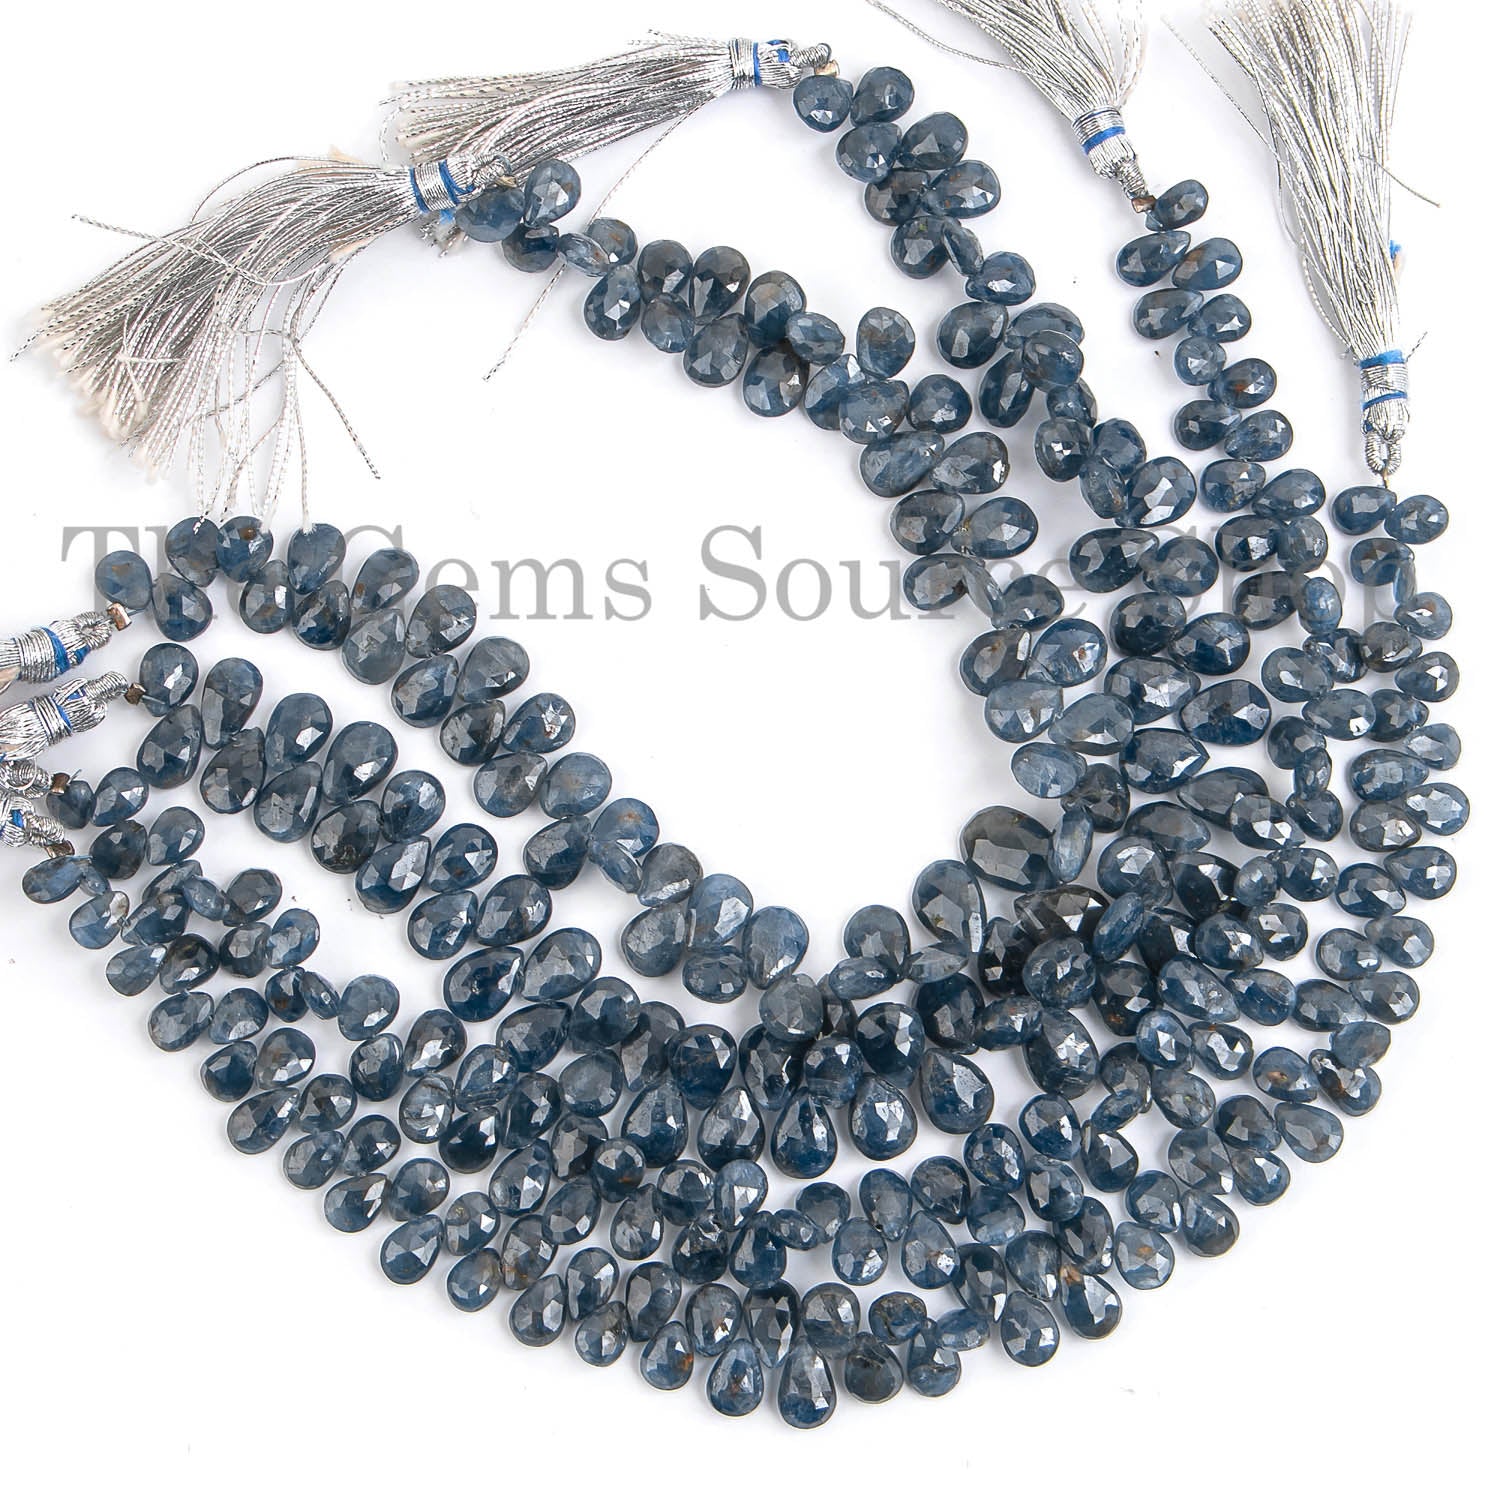 Blue Sapphire Gemstone Beads, Sapphire Faceted Pear Shape Beads